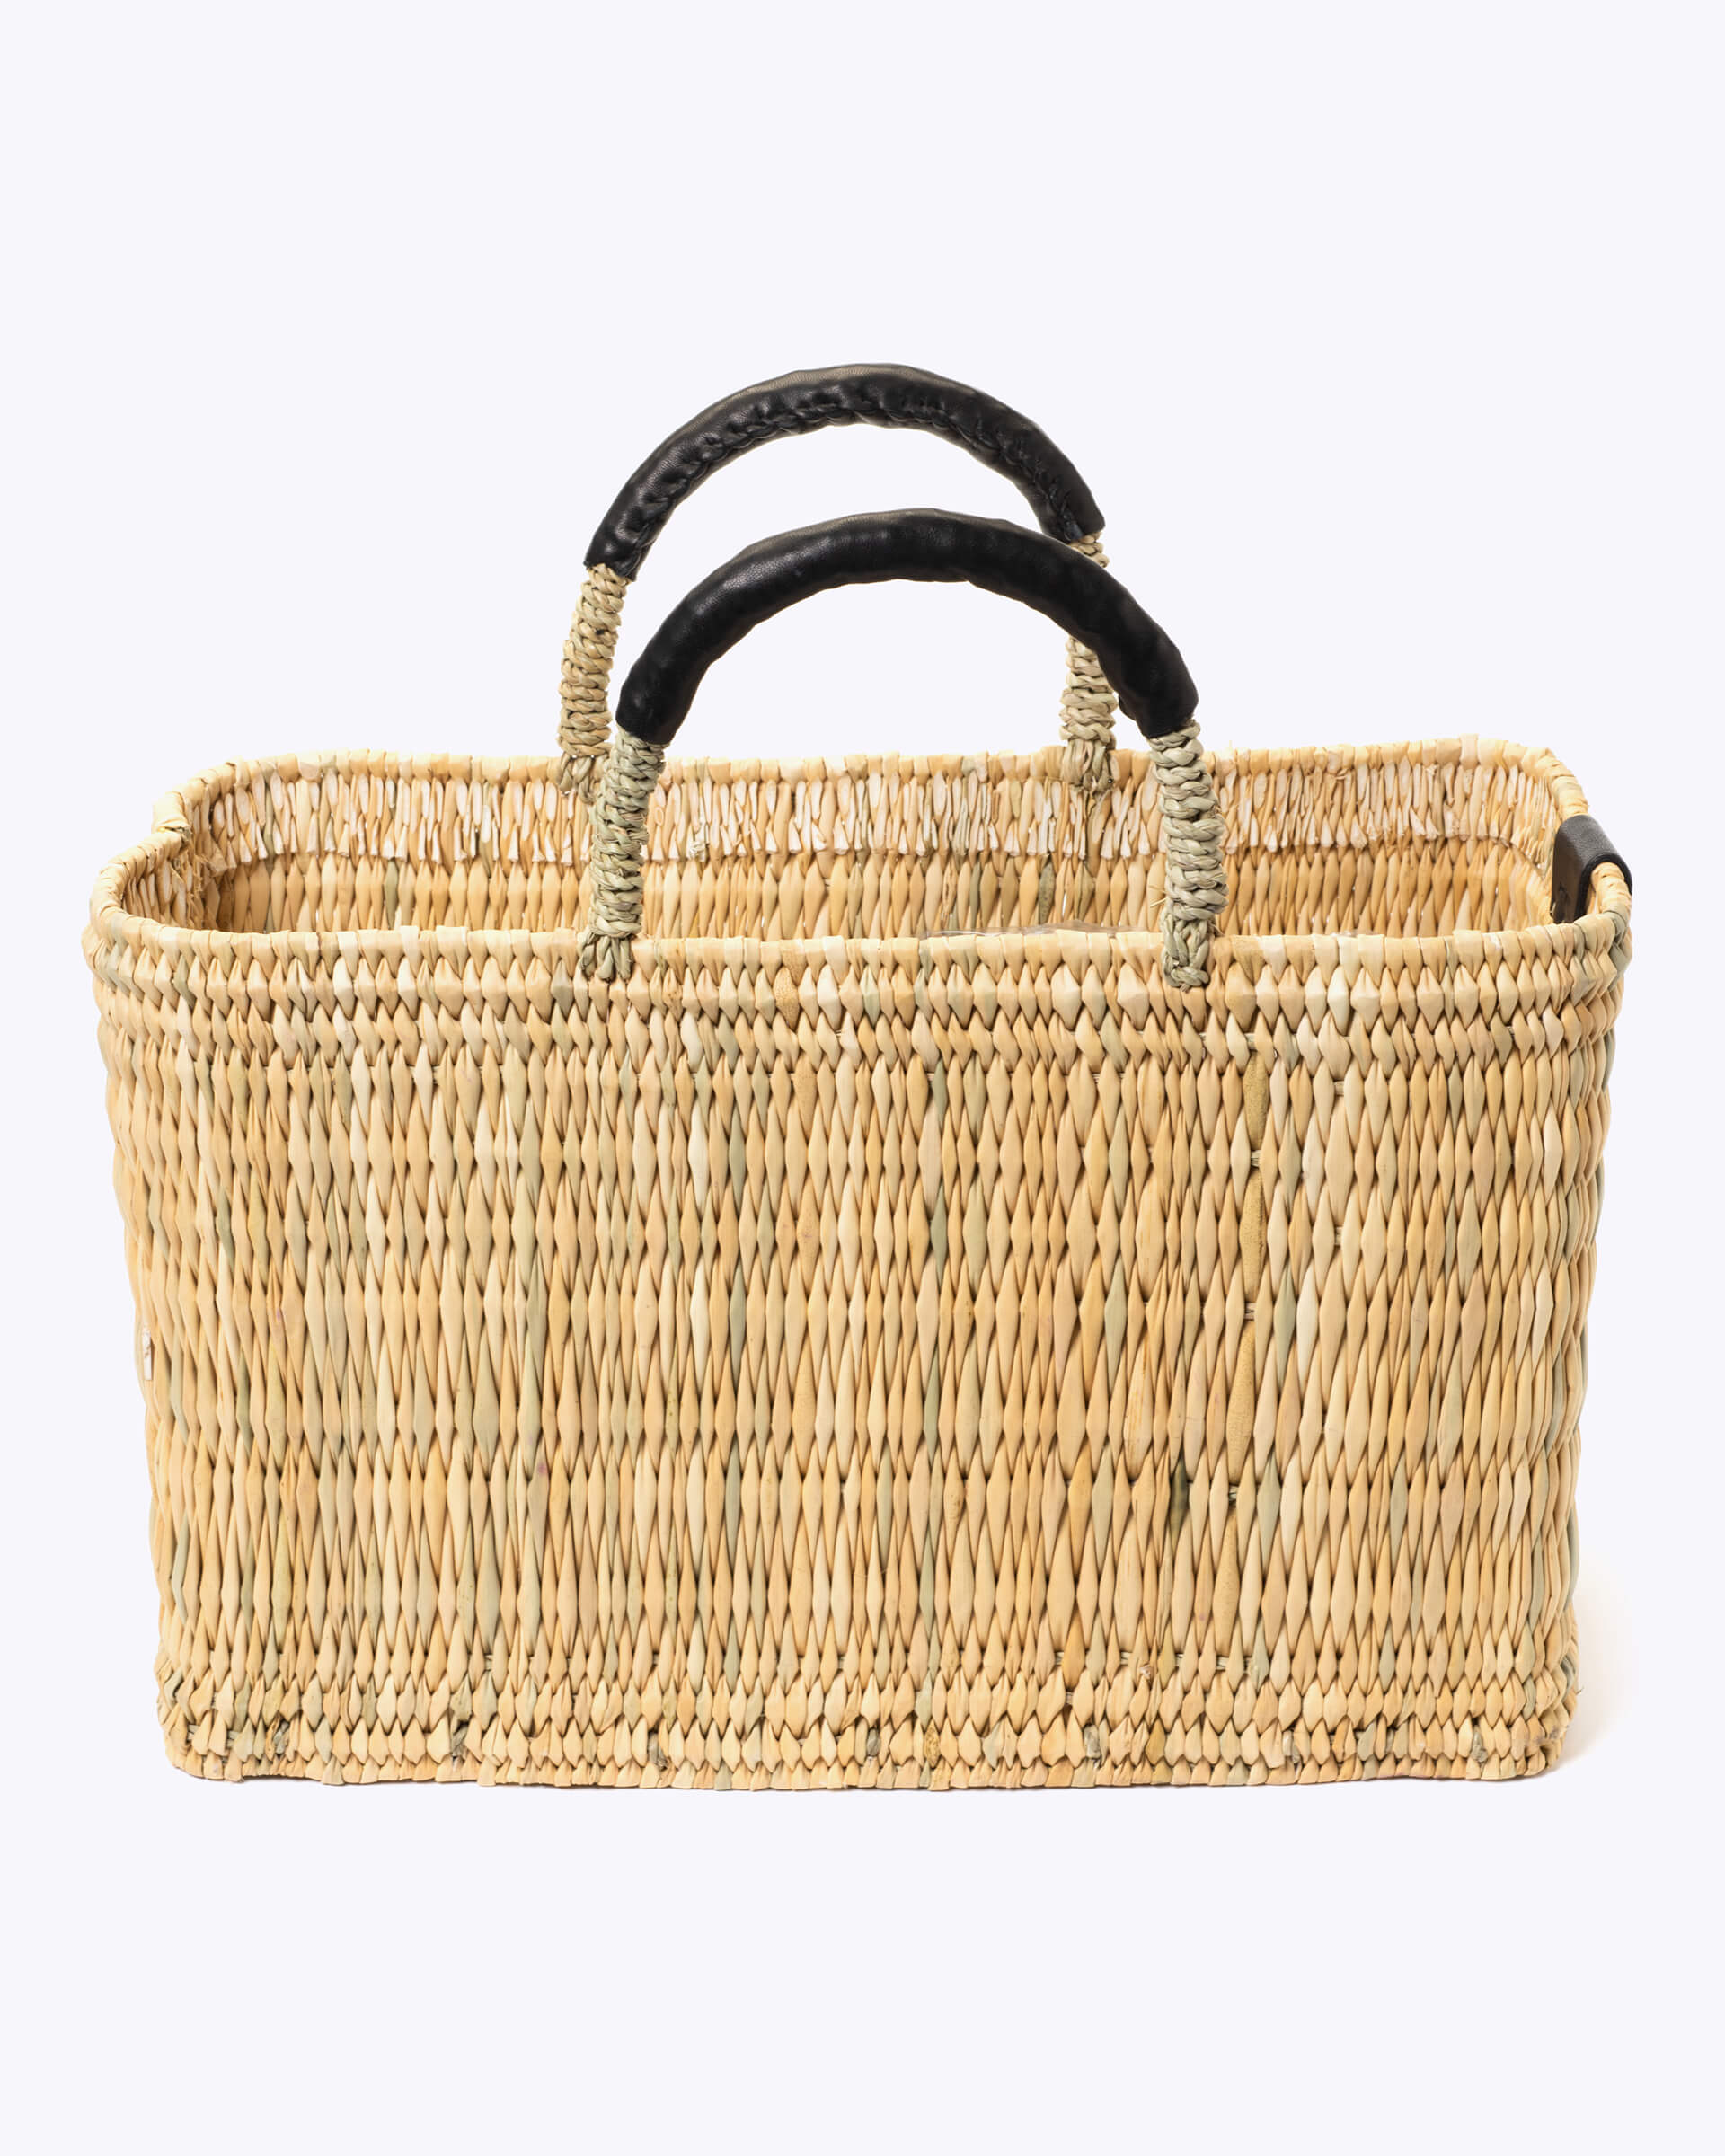 medium straw basket wrapped with black leather handle on a white background